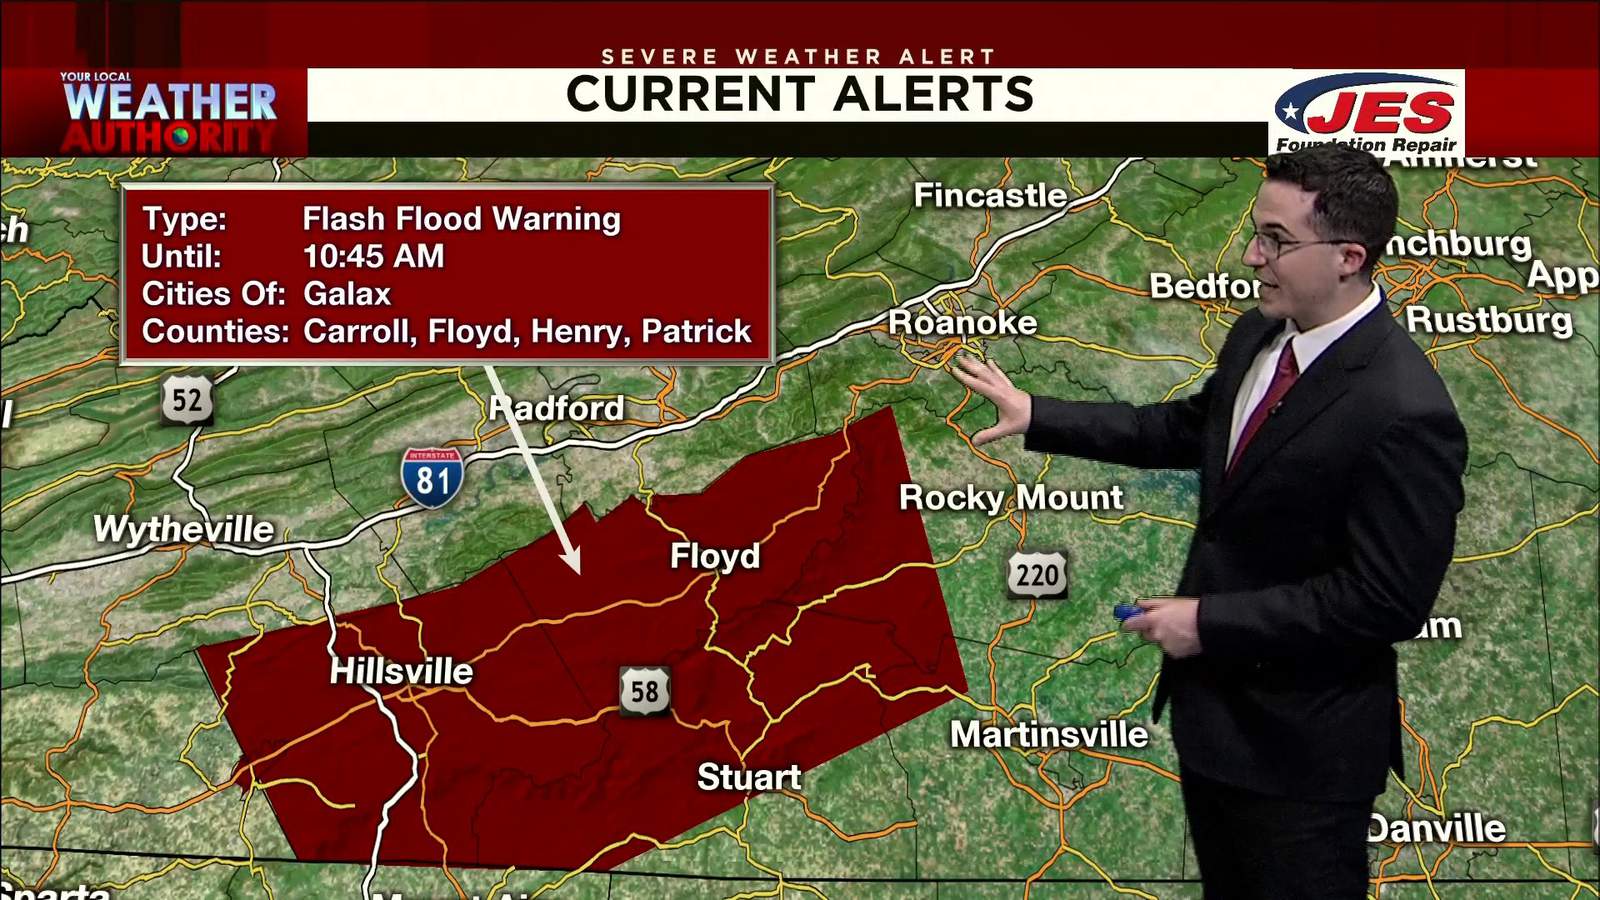 Flash Flood Warning issued for areas across southwest Virginia